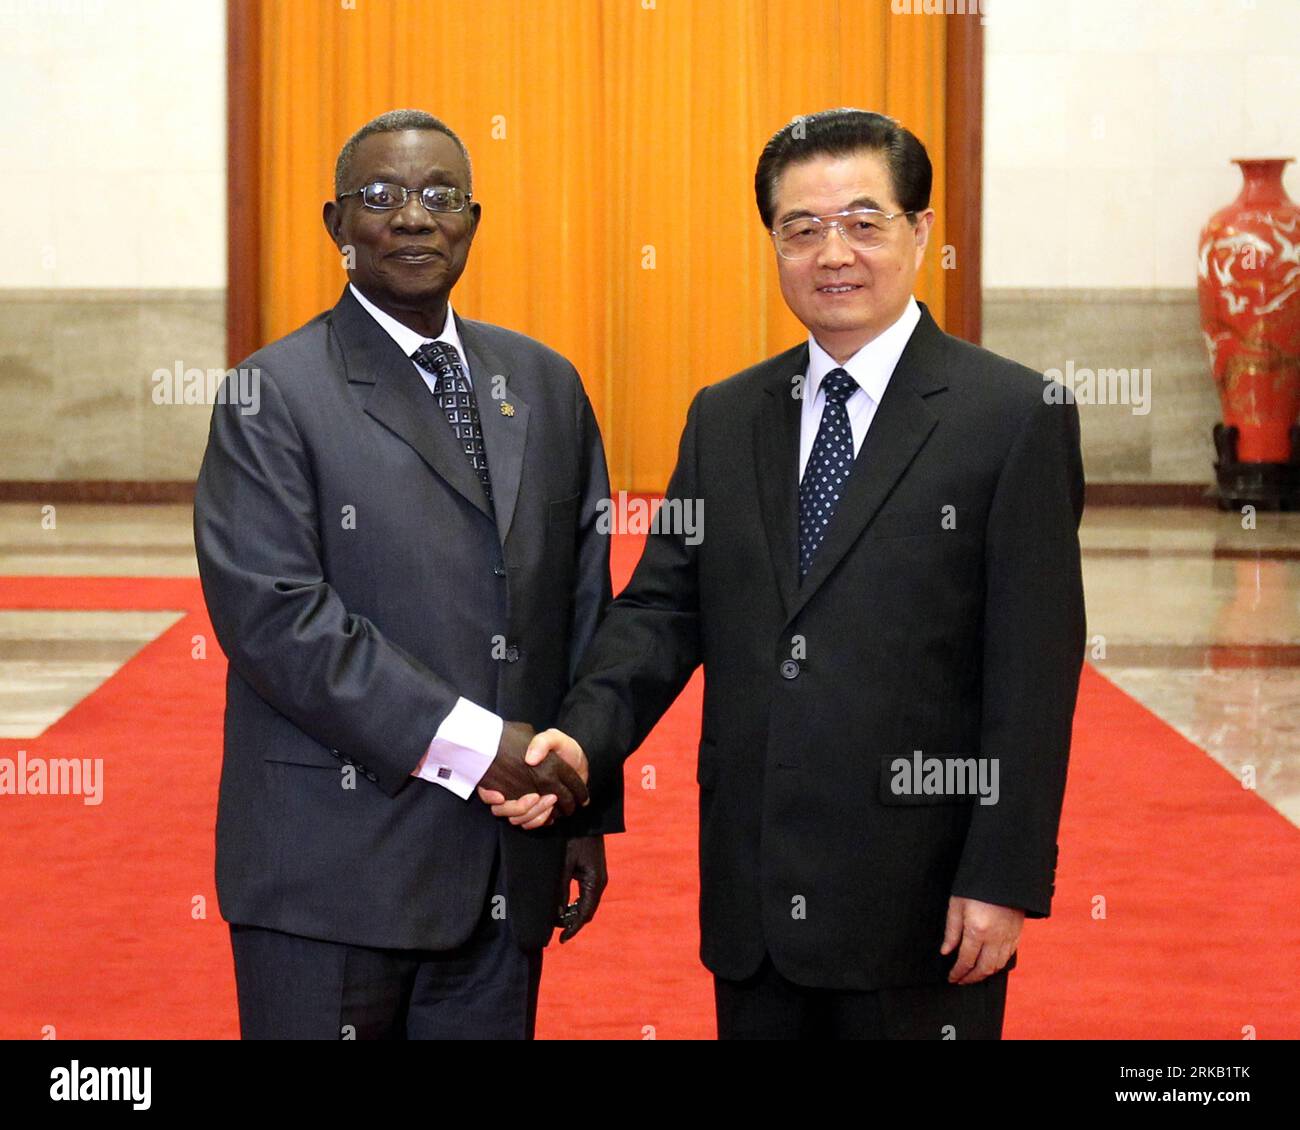 Bildnummer: 54445139  Datum: 20.09.2010  Copyright: imago/Xinhua (100920) -- BEIJING, Sept. 20, 2010 (Xinhua) -- Chinese President Hu Jintao (R) shakes hands with his Ghanaian counterpart John Evans Atta Mills during a welcoming ceremony he holds for Mills at the Great Hall of the in Beijing, capital of China, Sept. 20, 2010. (Xinhua/Ding Lin) CHINA-GHANA-PRESIDENTS-WELCOMING CEREMONY (CN) PUBLICATIONxNOTxINxCHN People Politik kbdig xdp 2010 quadrat premiumd xint     Bildnummer 54445139 Date 20 09 2010 Copyright Imago XINHUA  Beijing Sept 20 2010 XINHUA Chinese President HU Jintao r Shakes Han Stock Photo